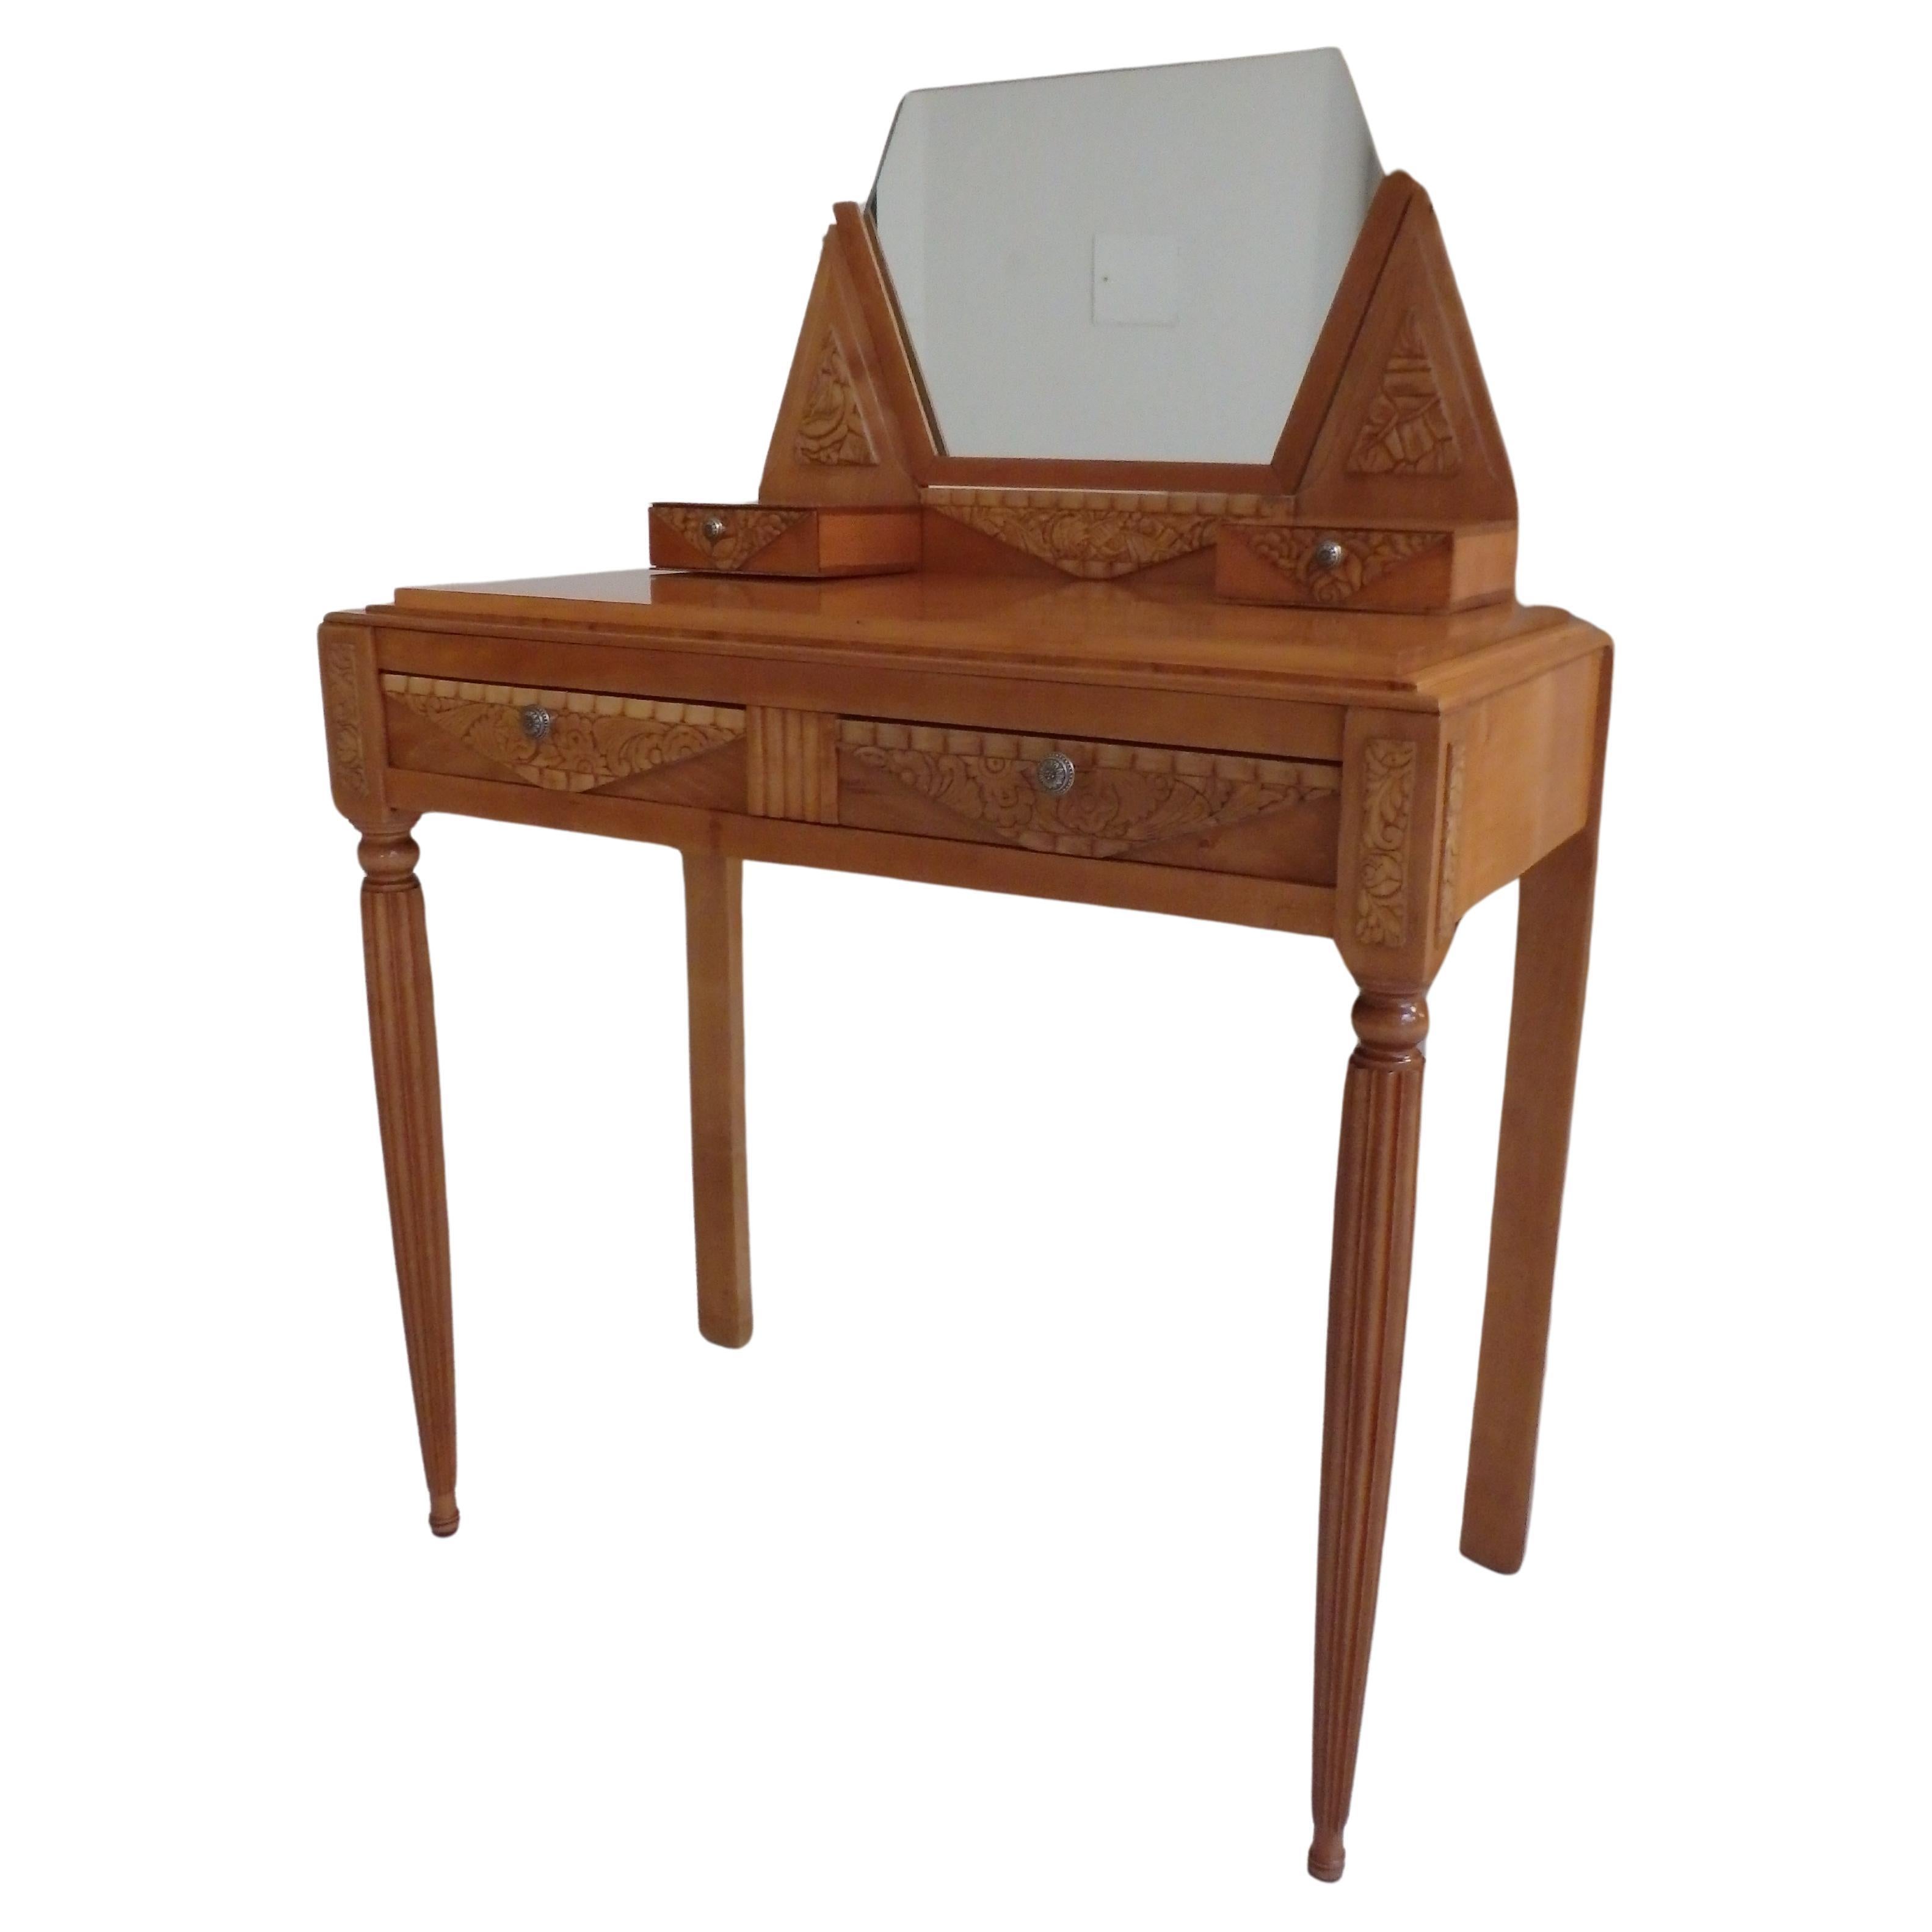 1920thies birch with cubistic carved flowers vanity , console or writing desk For Sale